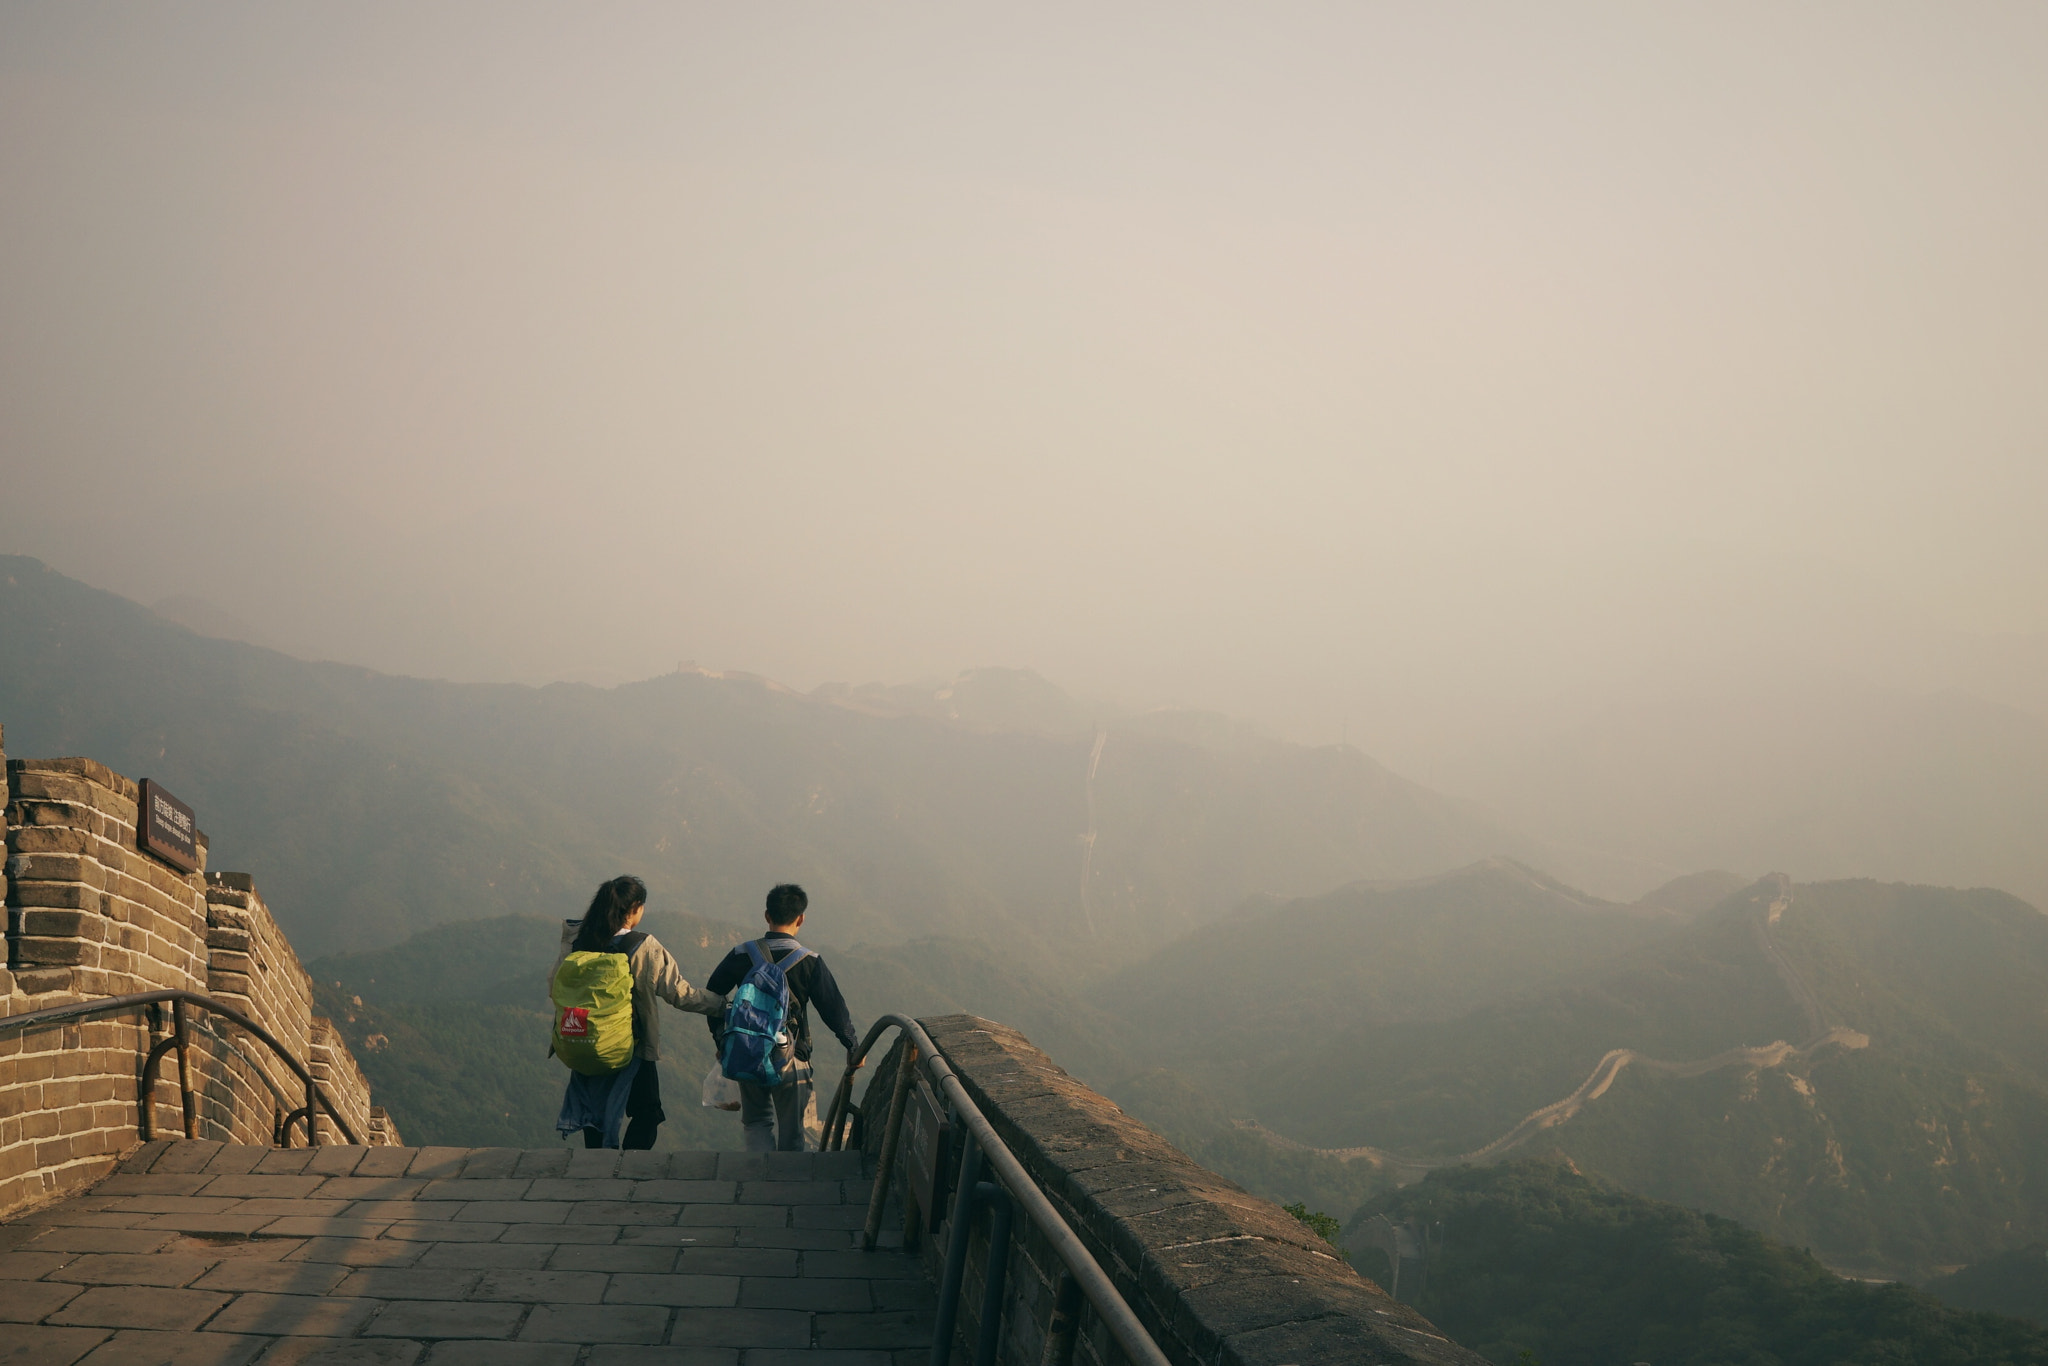 Sony a7 sample photo. Badaling great wall - a smoggy day photography